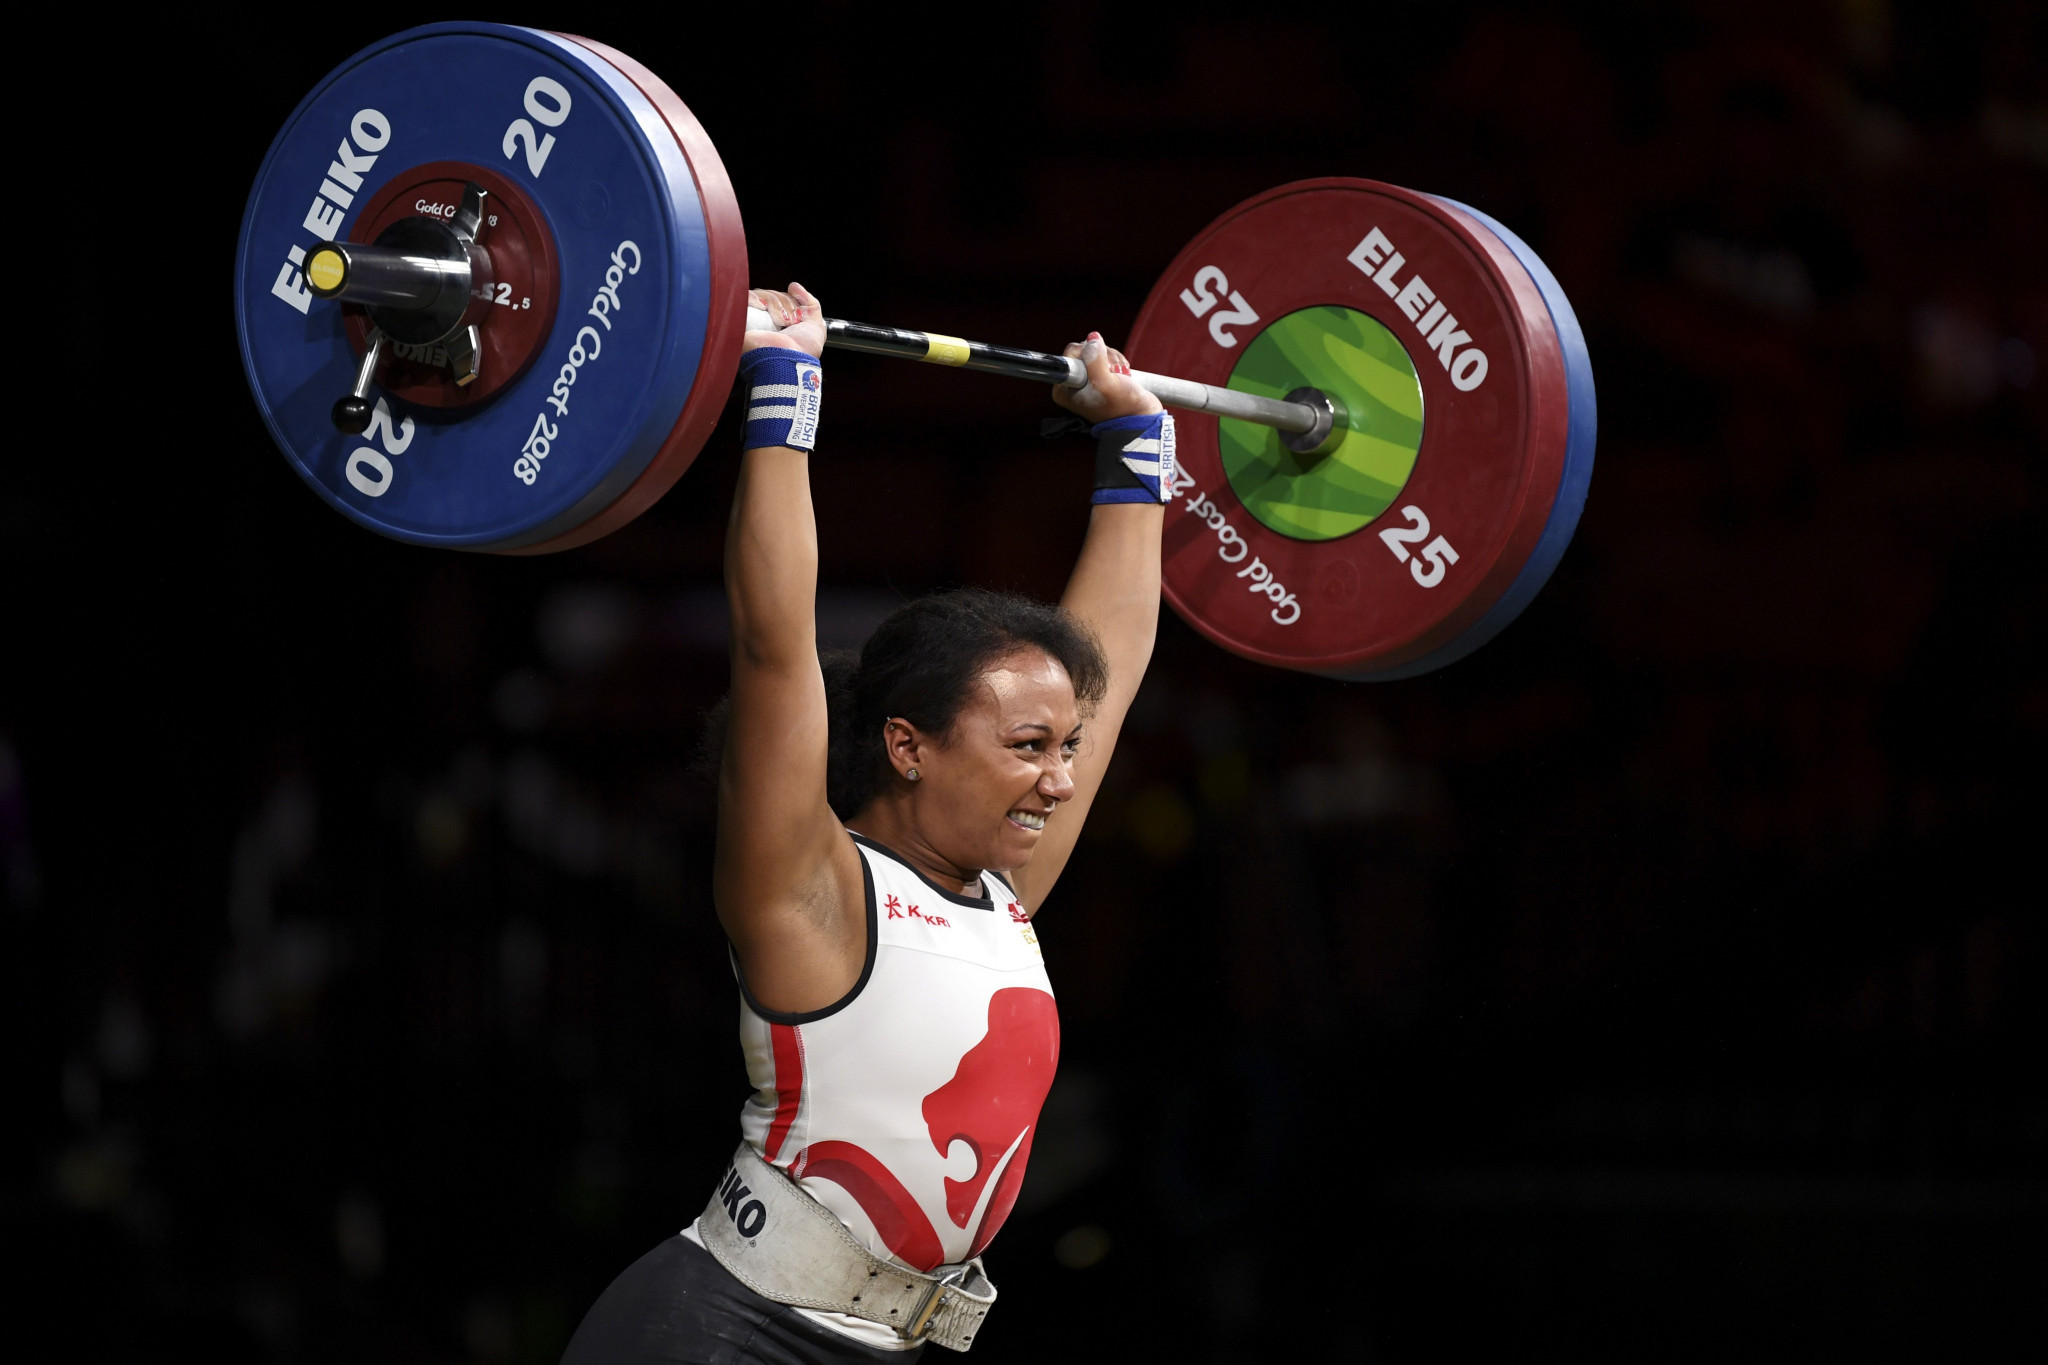 British lifter Zoe Smith triumphed at Ricoh Arena ©Getty Images